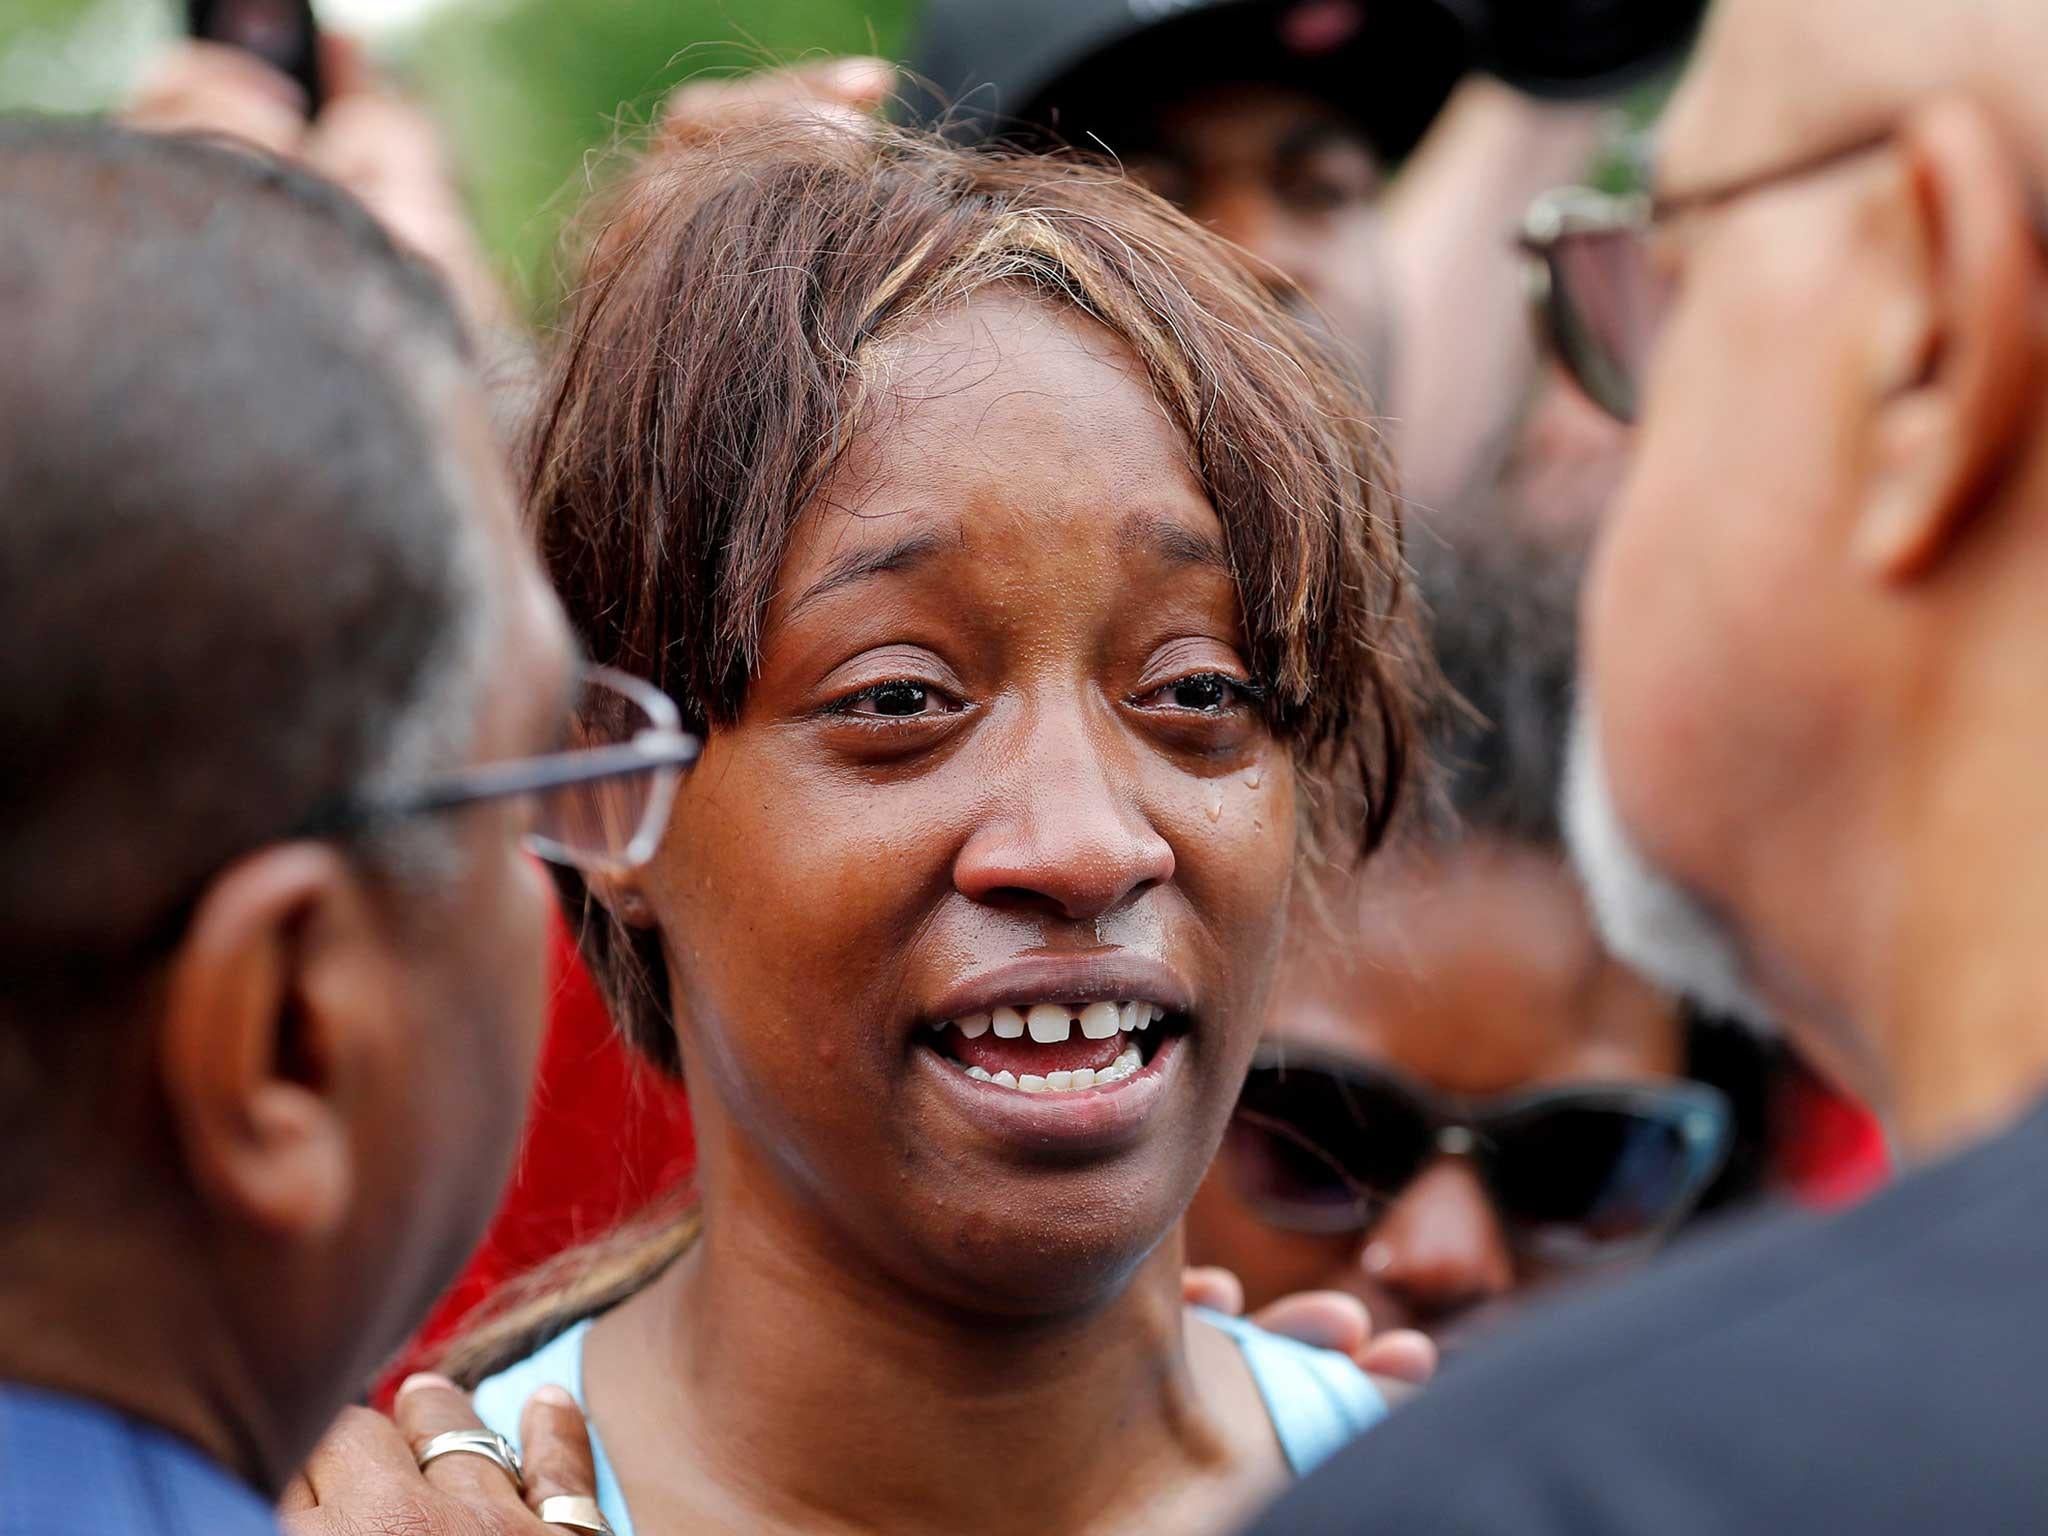 &#13;
Diamond Reynolds, Mr Castile's girlfriend, is determined to fight for justice &#13;